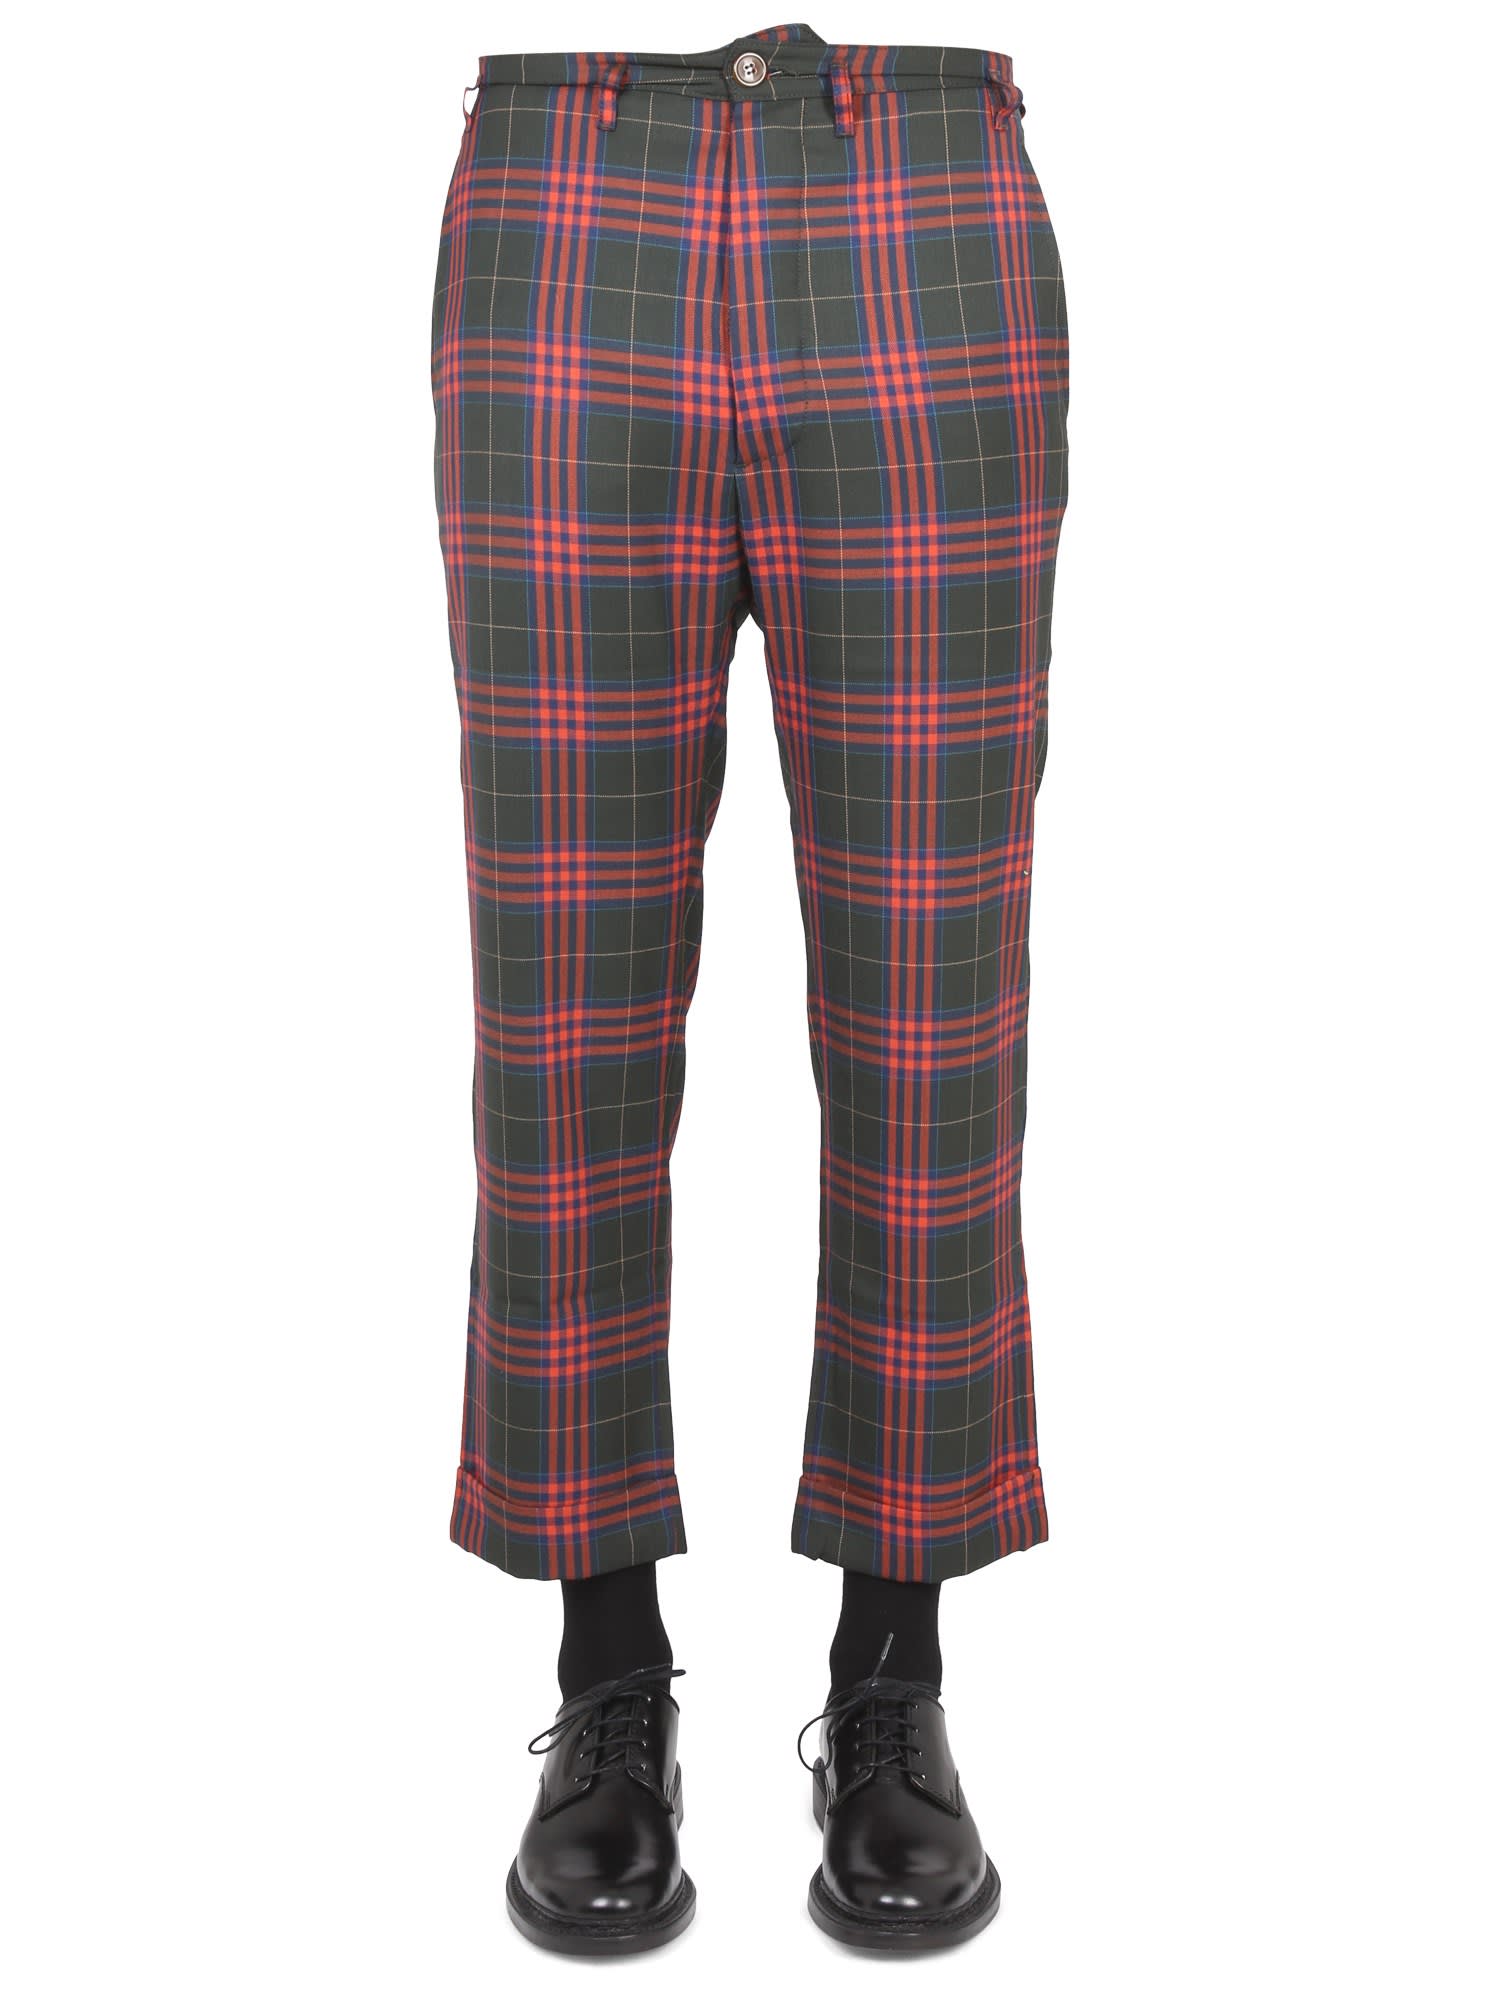 Vivienne Westwood Wreck Fitted Pants